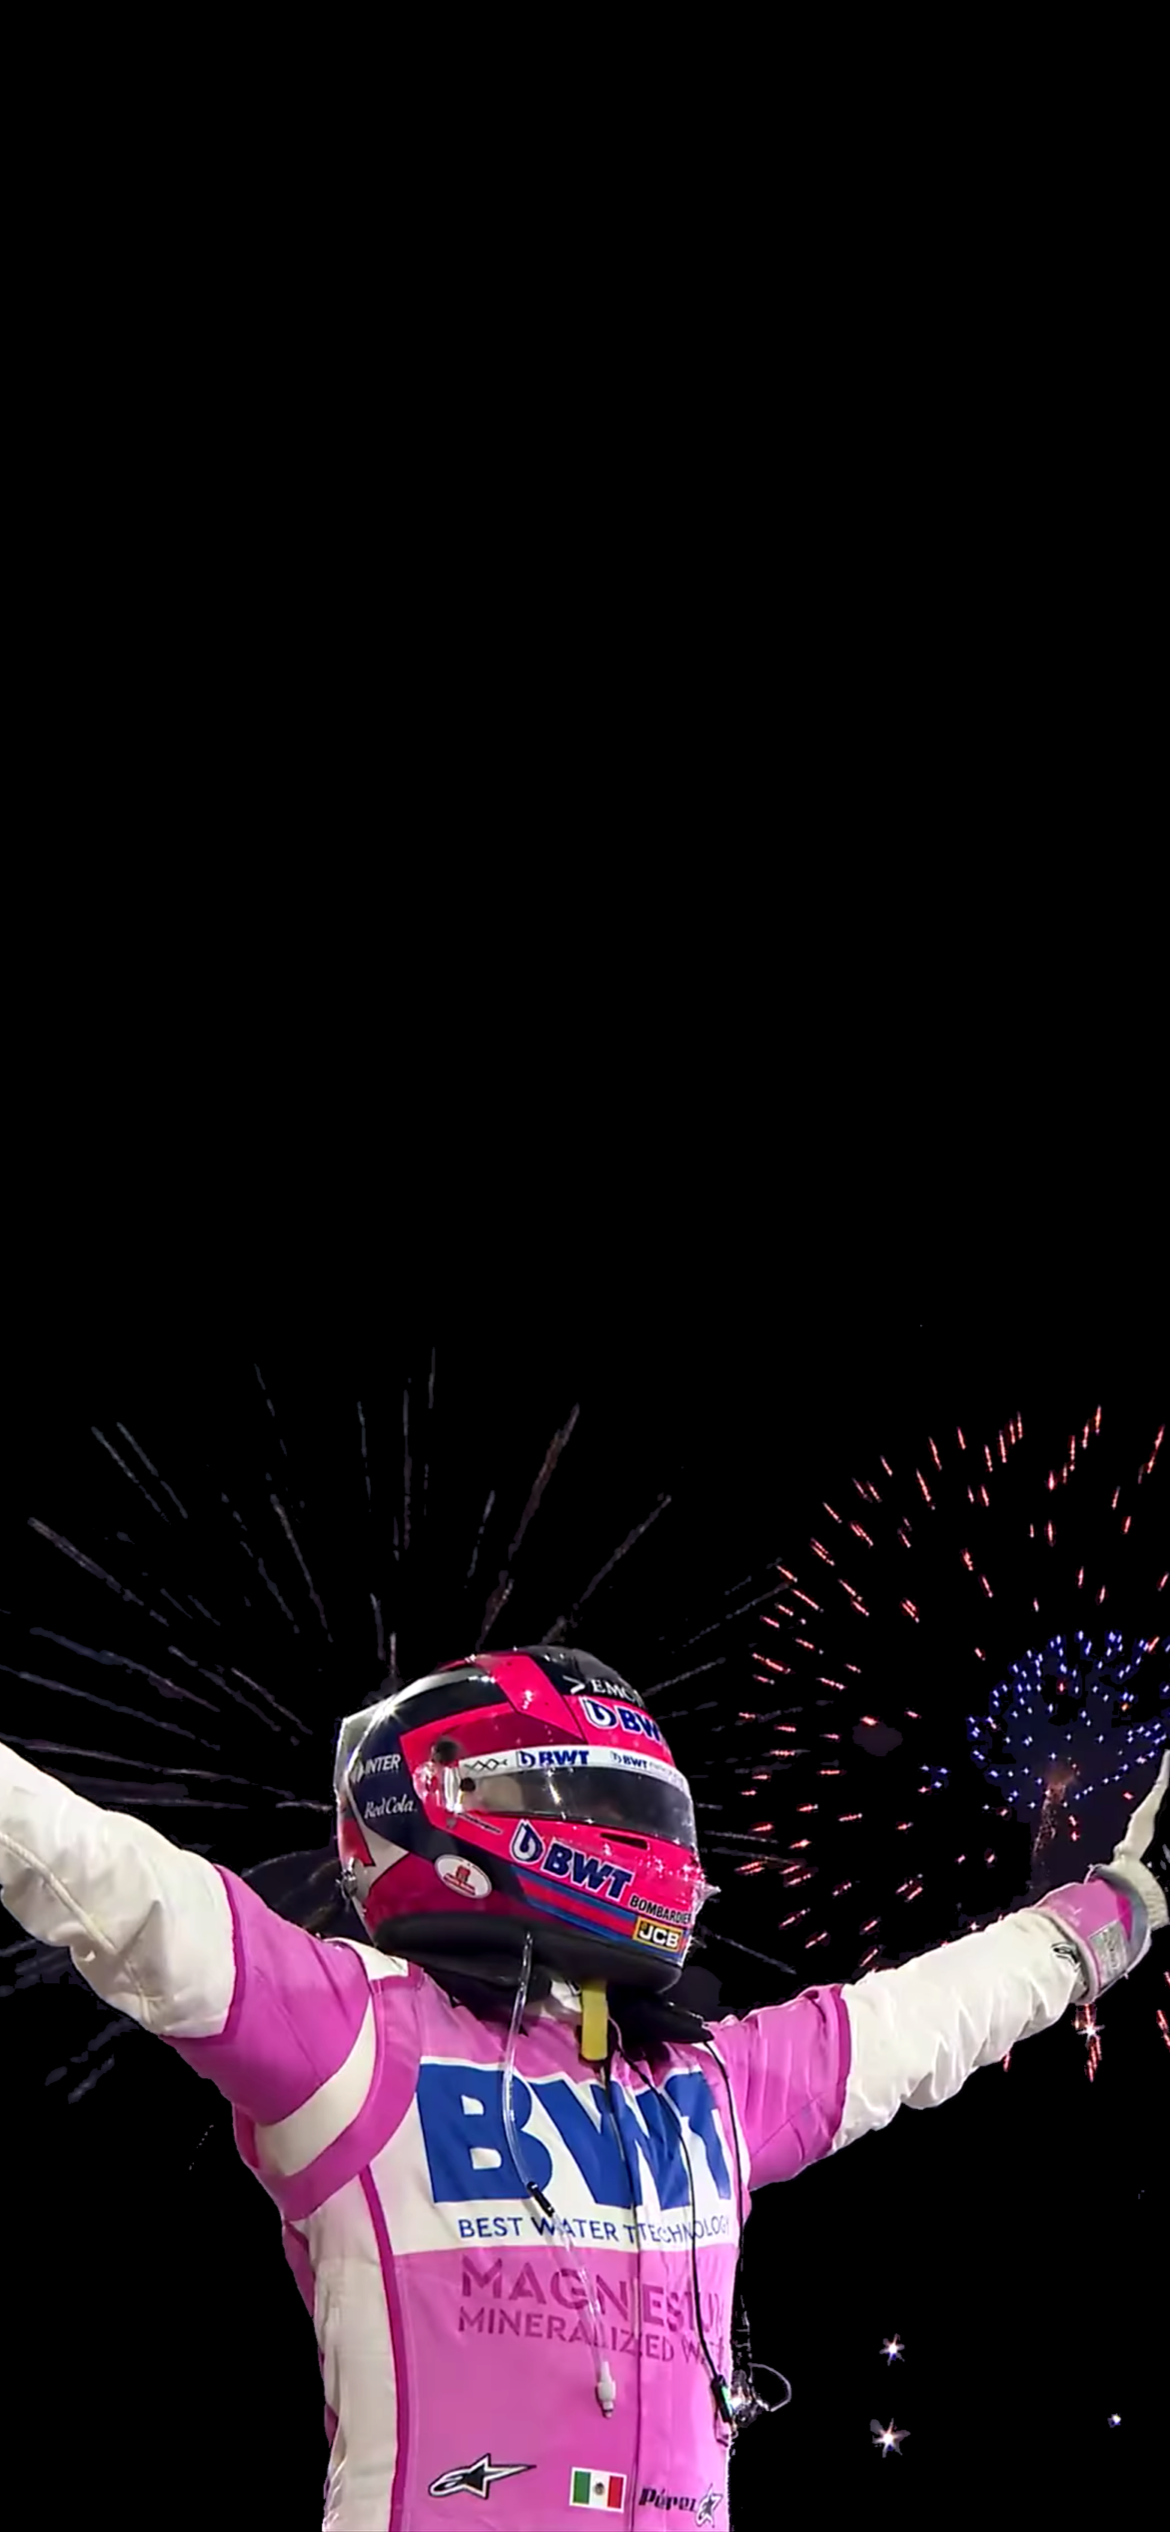 Sergio Perez OLED phone wallpaper to celebrate his first win